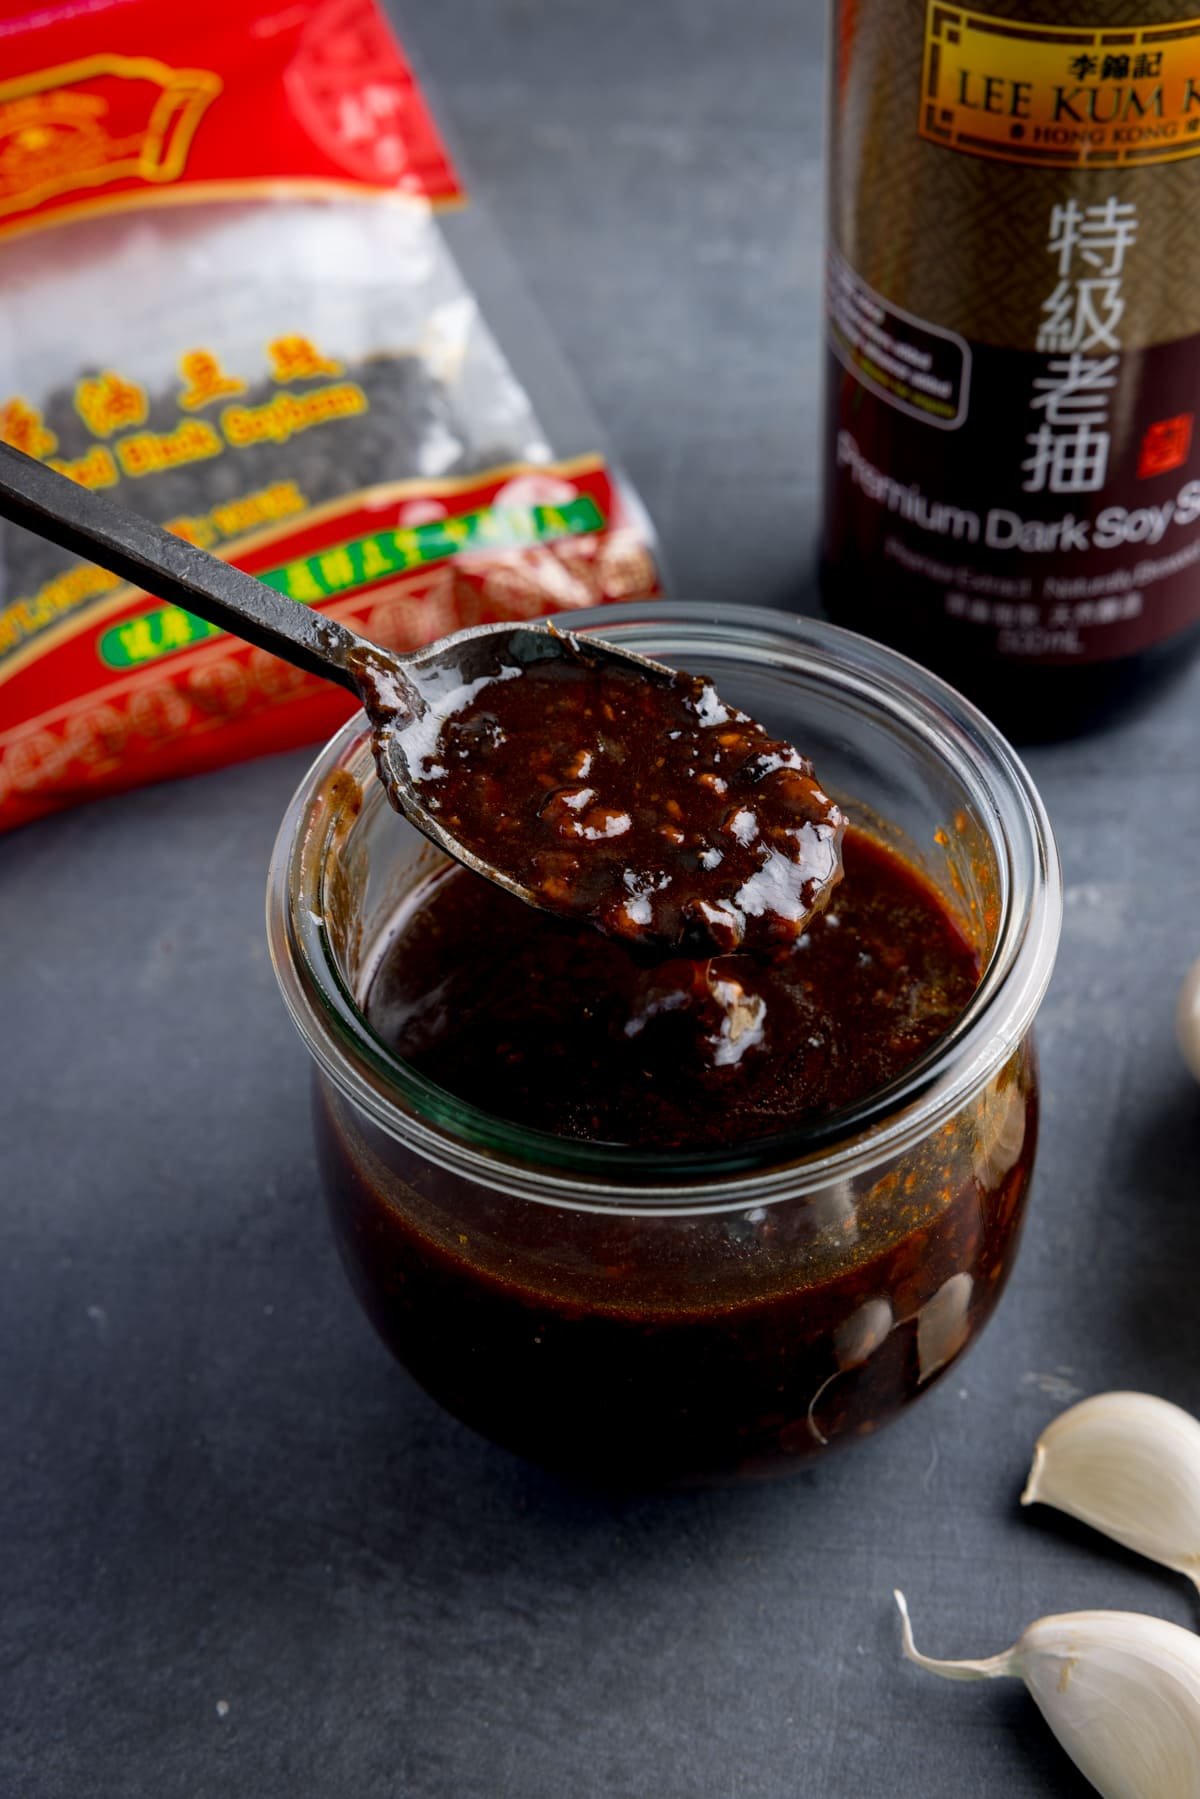 A glass jar filled with homemade black bean sauce. There is a black spoon, taking a spoonful from the jar.
The jar is on a dark surface and there are ingredients scattered around.